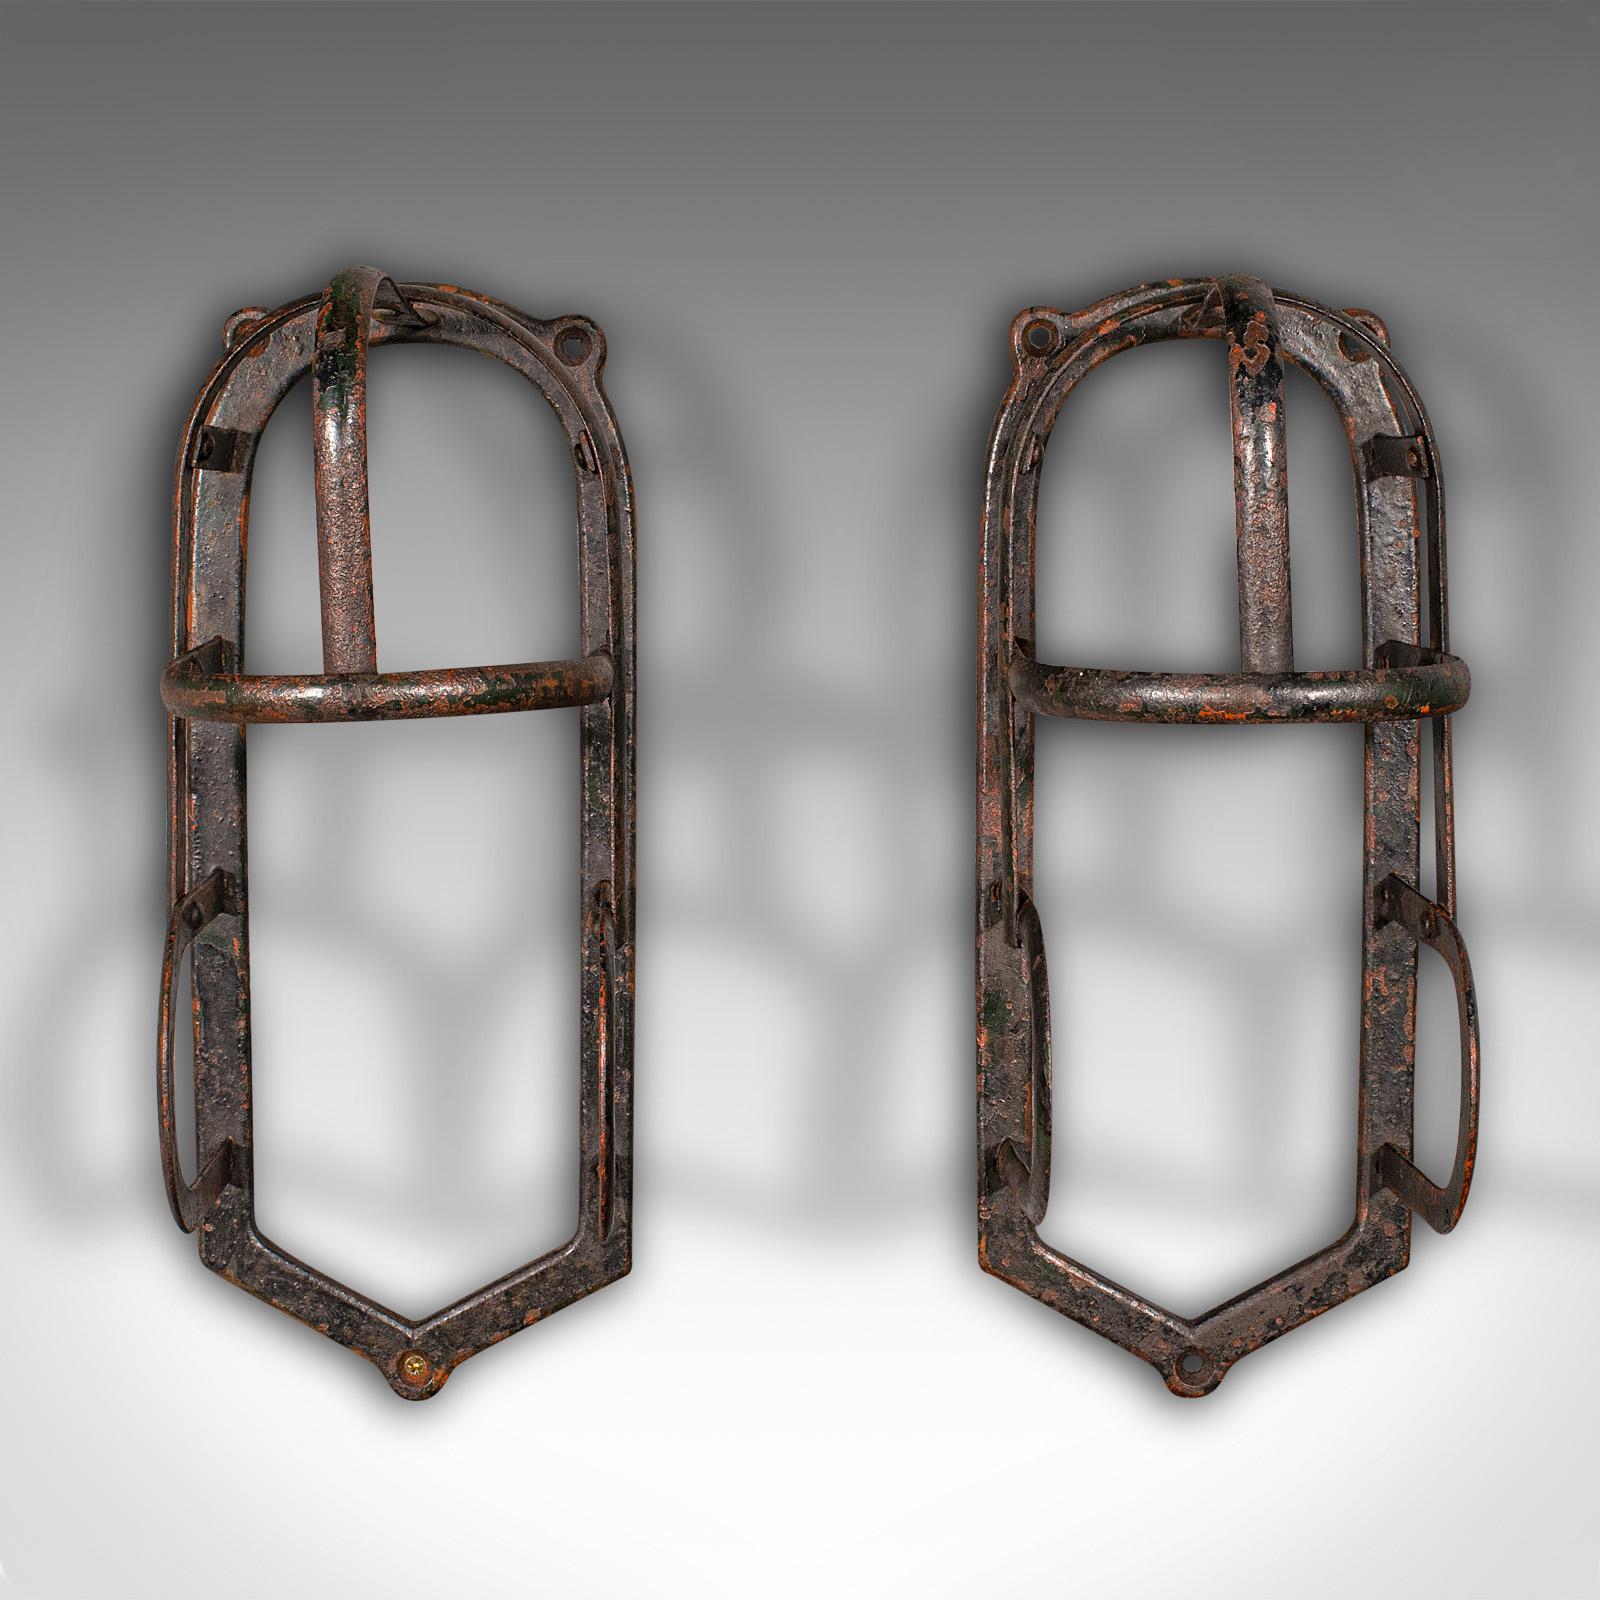 This is a pair of antique equestrian tack rests. An English, cast iron stable or outdoor rack, dating to the late Victorian period, circa 1900.

Fascinating dome top form to this appealing pair of rests
Displaying a desirable aged patina with time